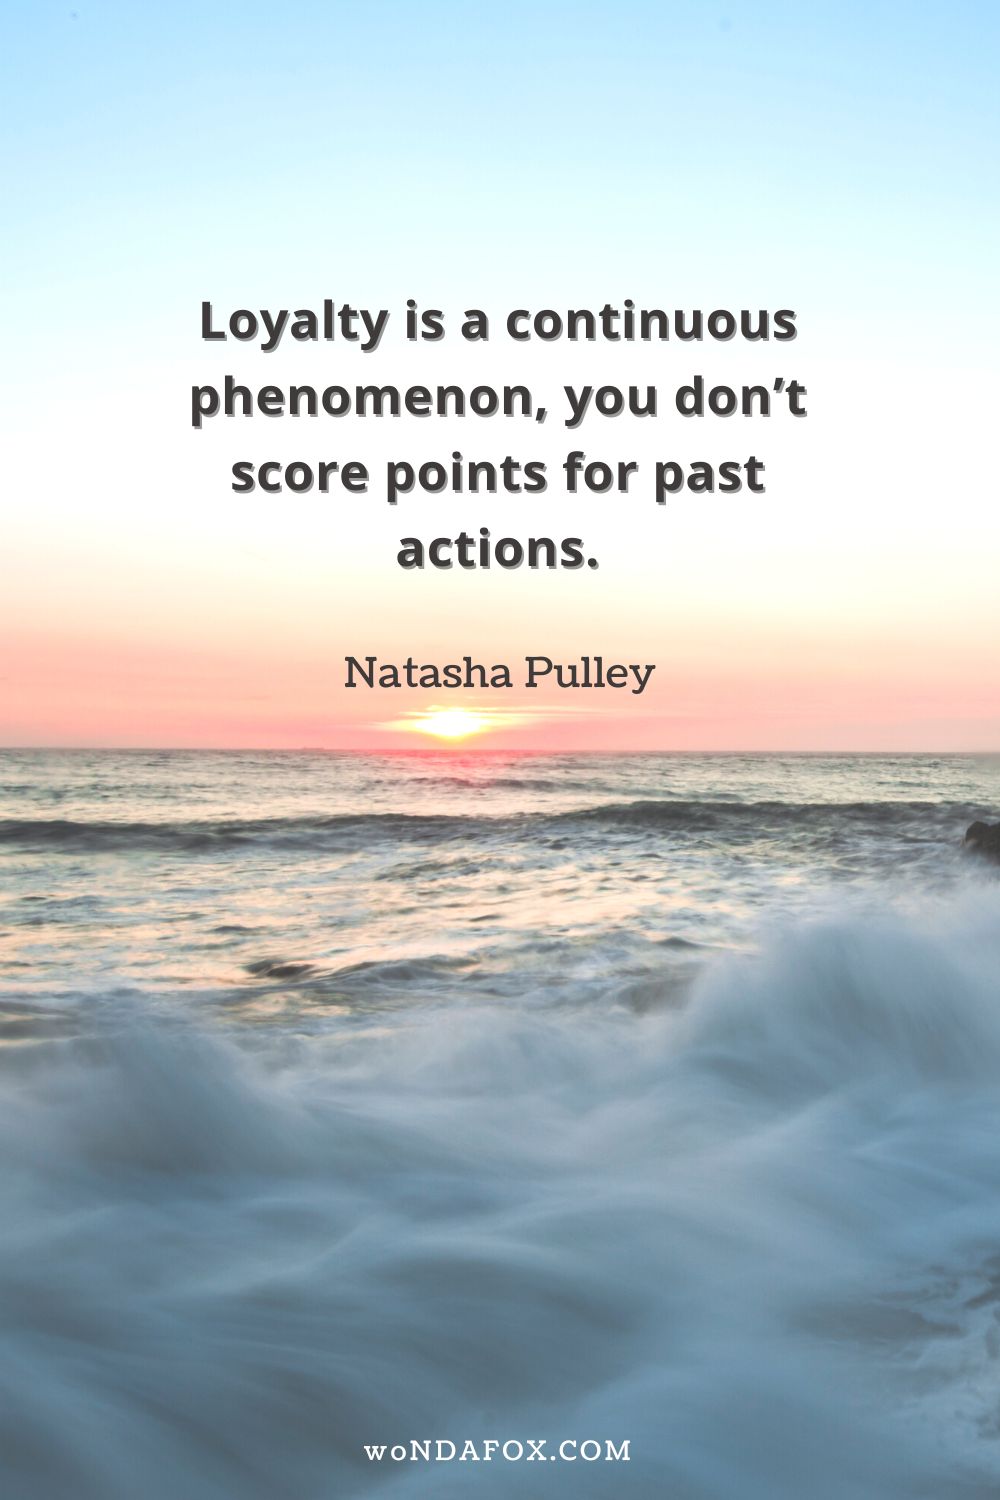 “Loyalty is a continuous phenomenon, you don’t score points for past actions.”